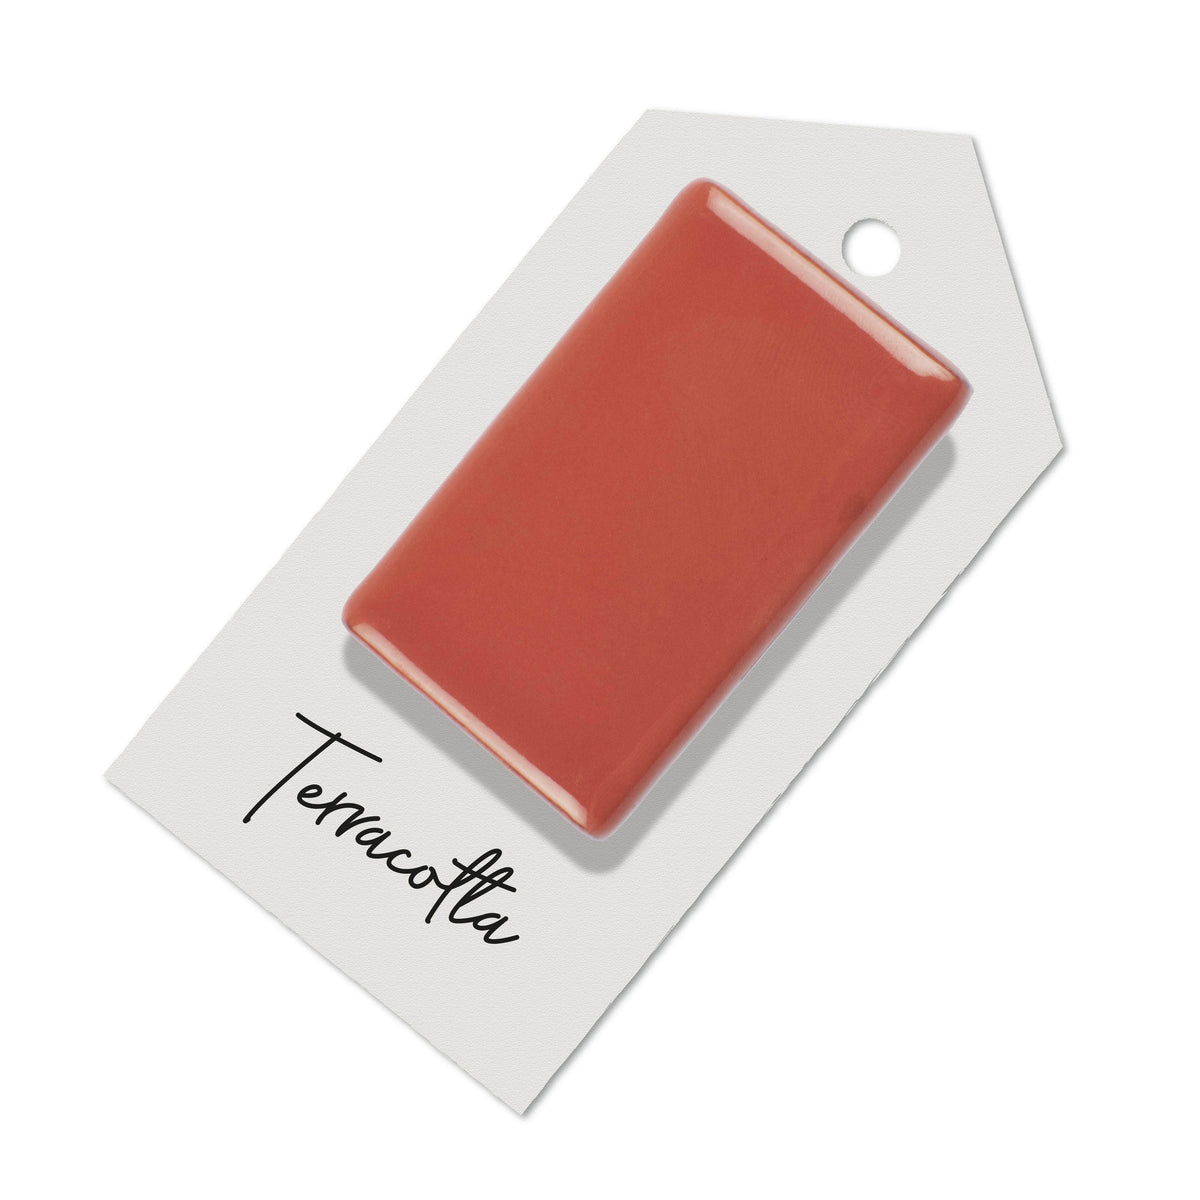 Terracotta sample for Aga range cooker re-enamelling &amp; reconditioned cookers